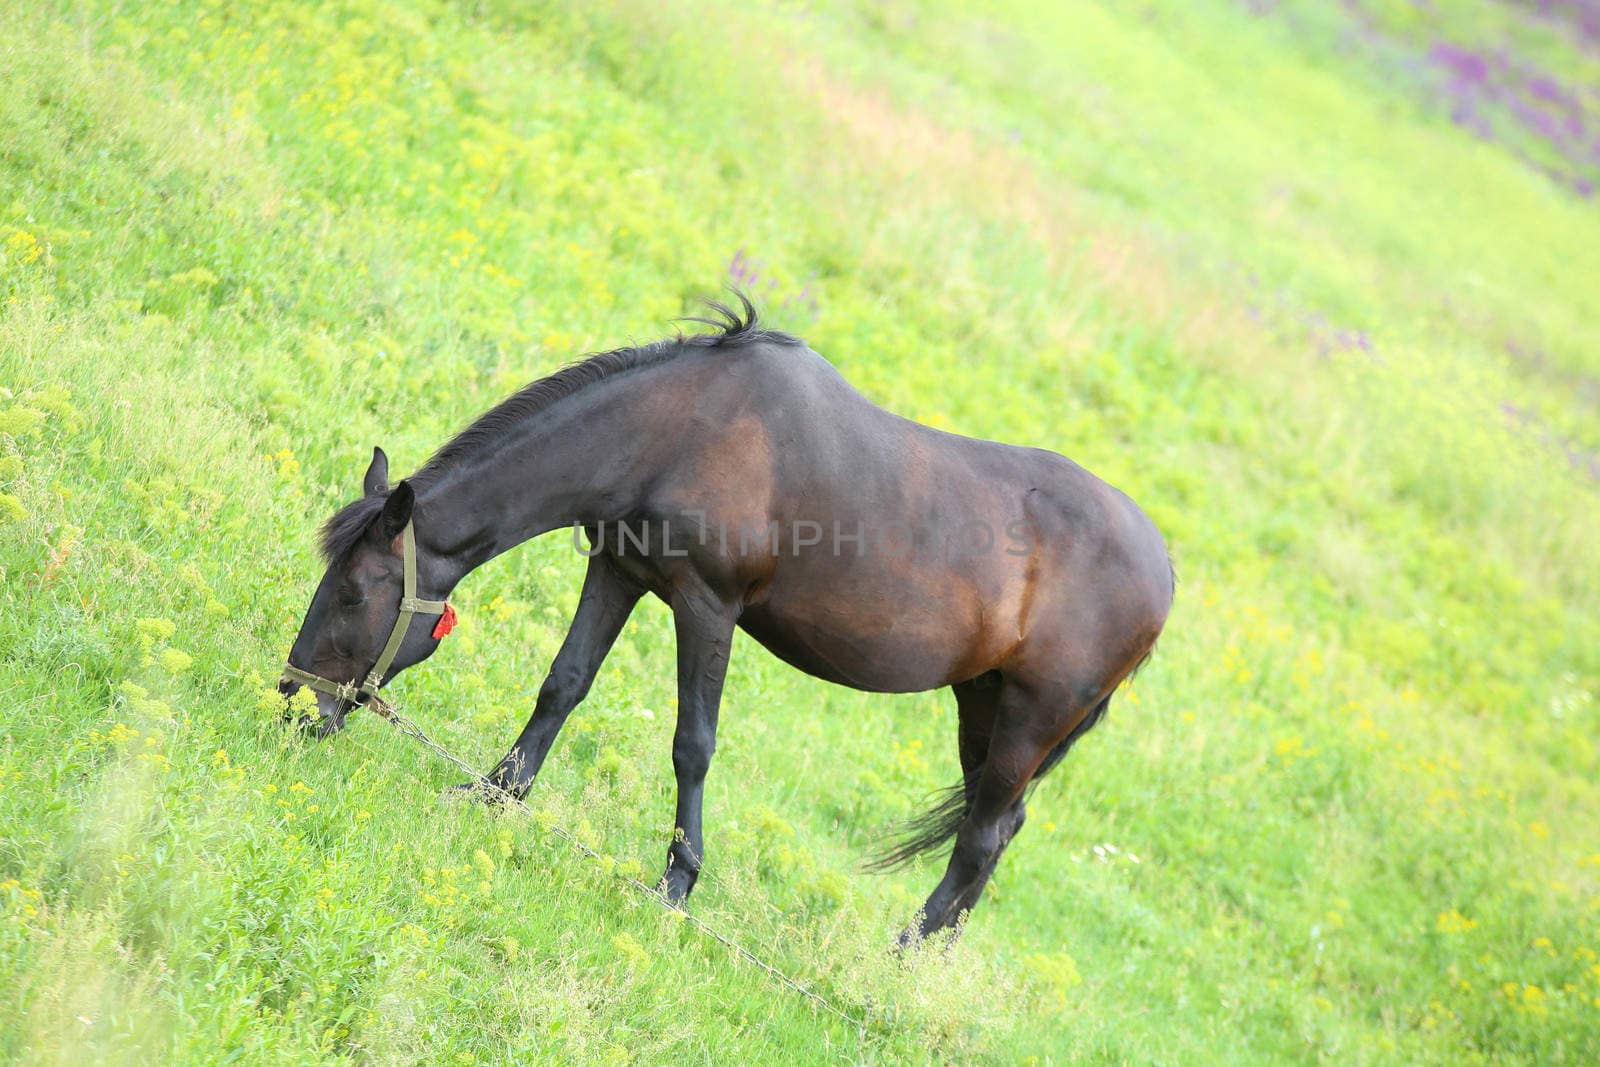 A horse in a meadow on a background of green grass.